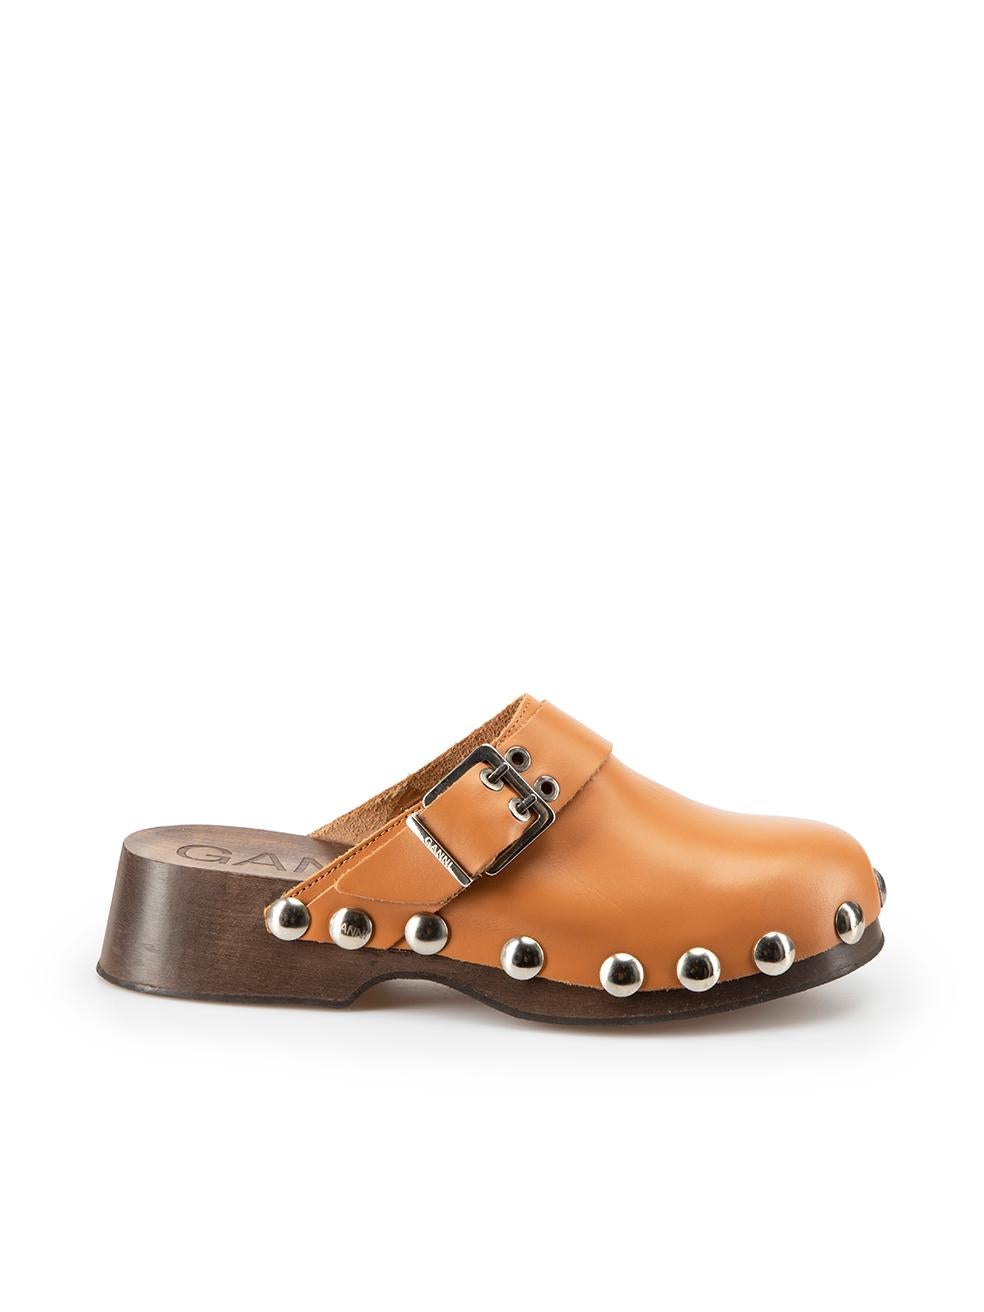 Brown Leather Stud-Detail Buckled Clogs Size IT 42 For Sale